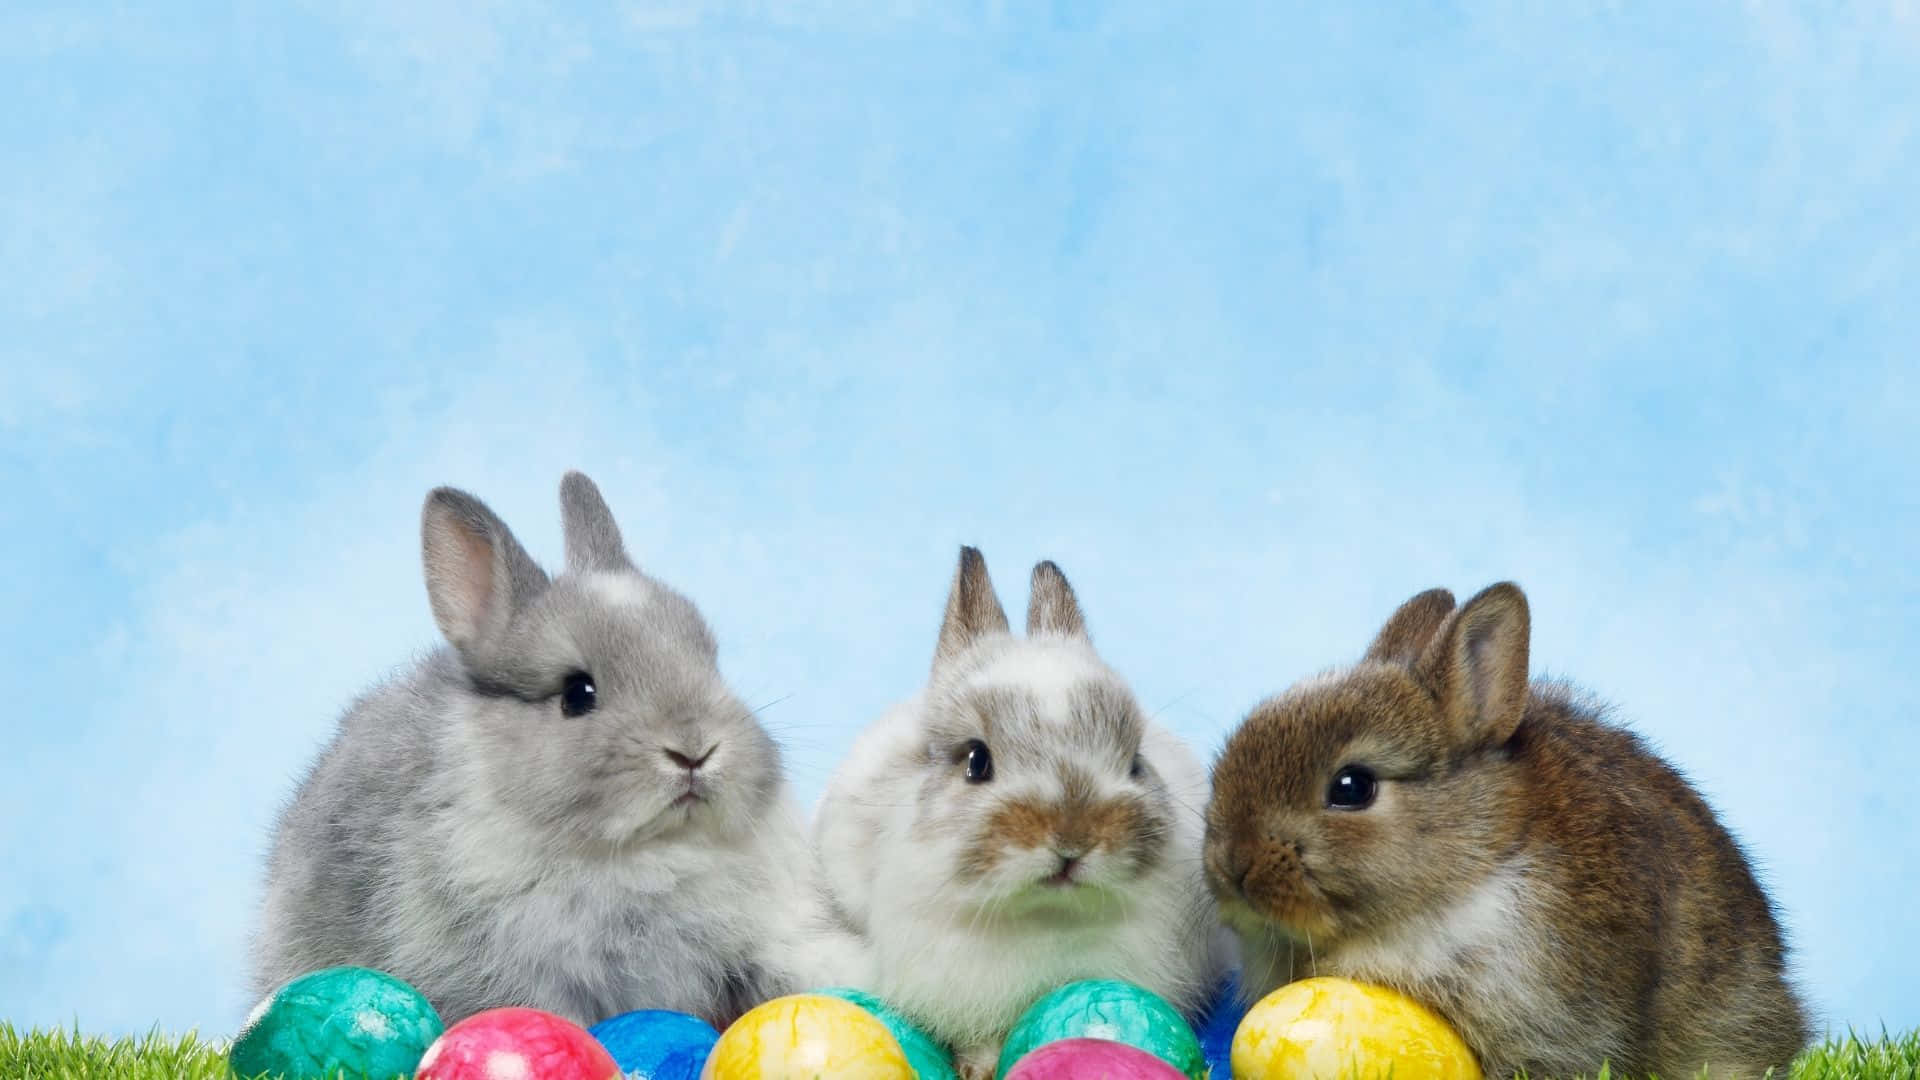 Three Rabbits Are Sitting In The Grass With Easter Eggs